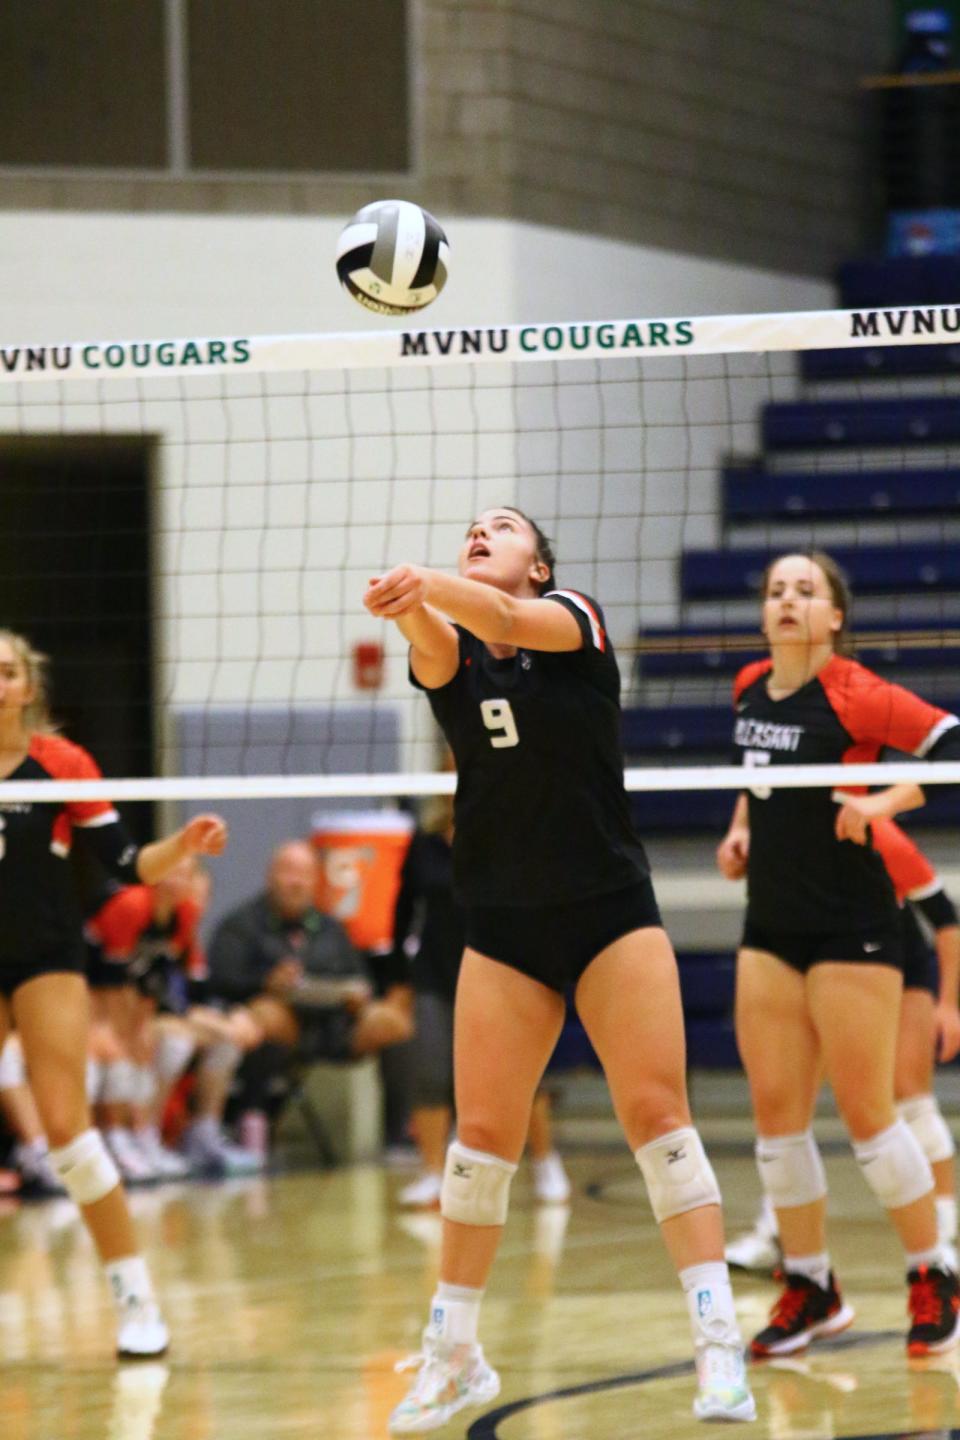 Cardington's Jadine Mills bump sets the ball against Pleasant during a Division III volleyball district championship match Saturday night at Mount Vernon Nazarene's Ariel Arena.